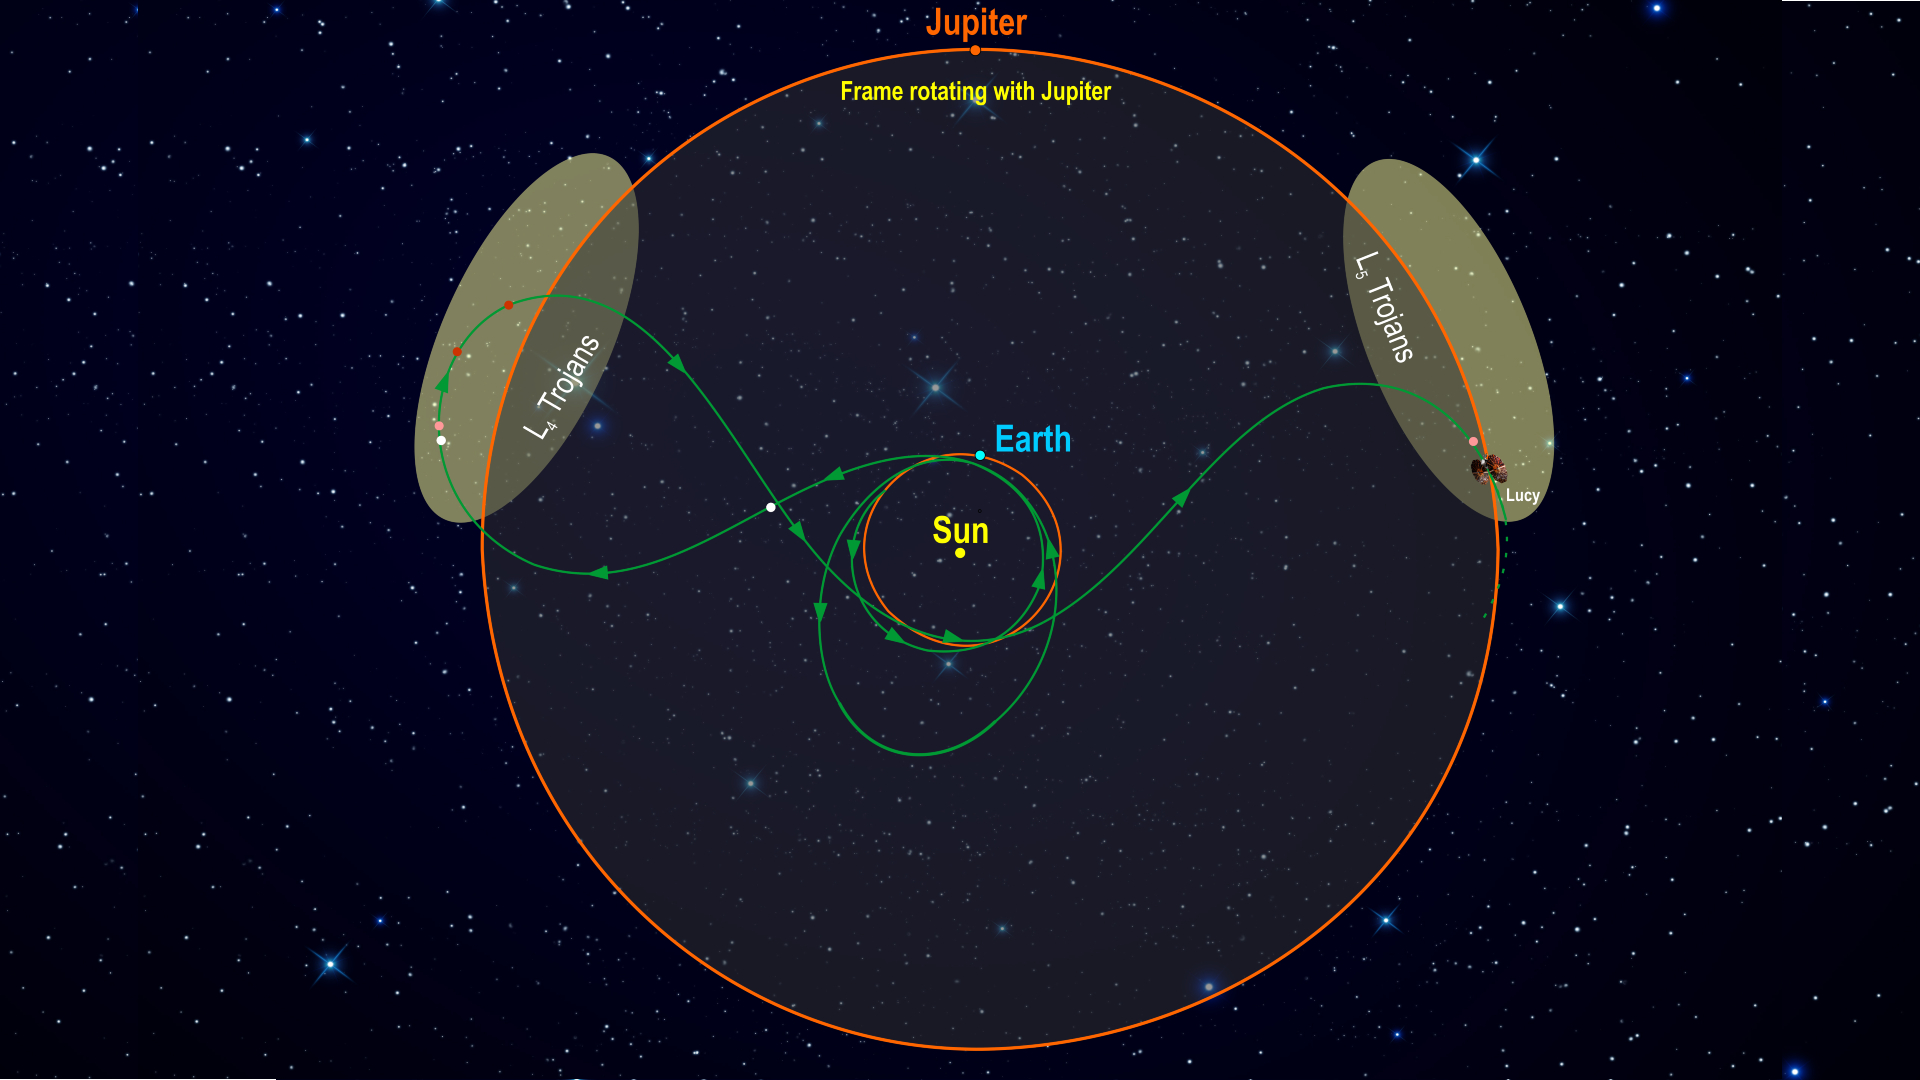 Lucy mission orbital path among the Trojan asteroids that trail and lead Jupiter.